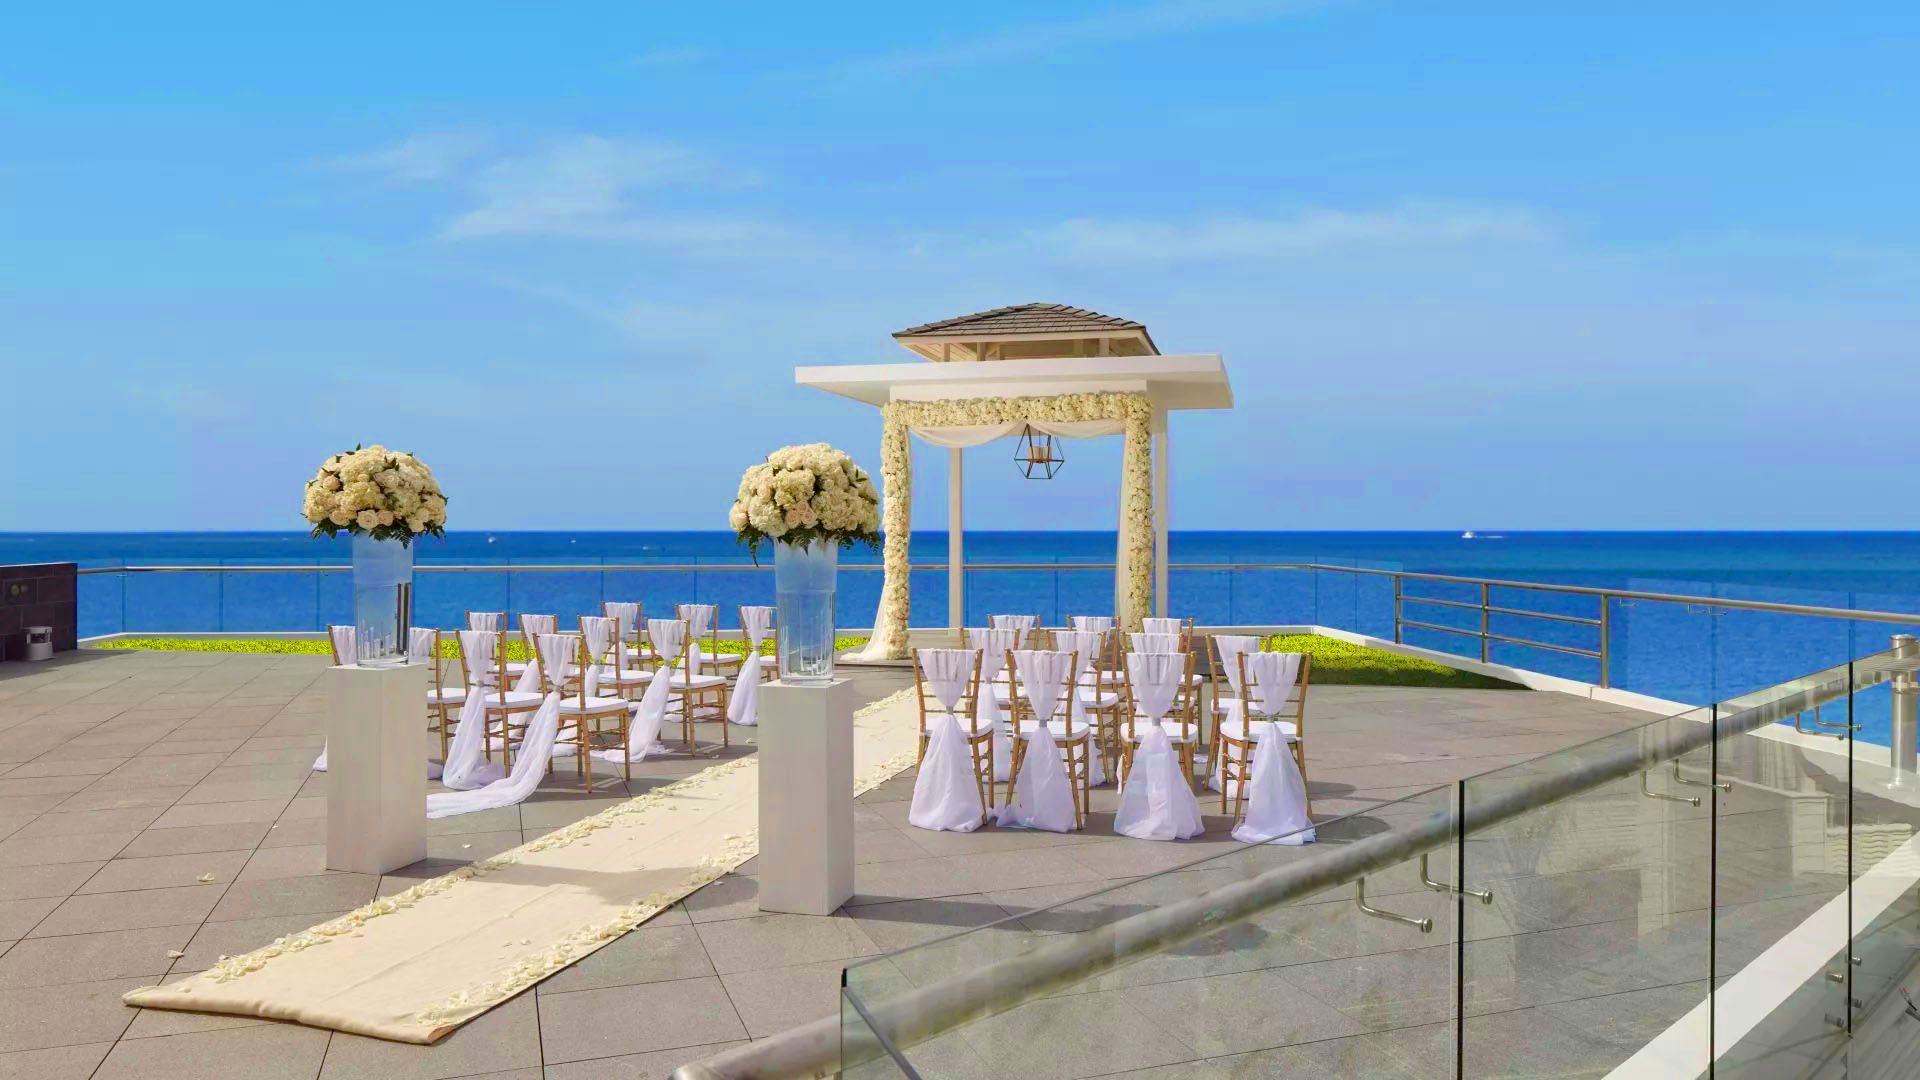 A Group Of Tables With White Cloths And Flowers On Them By The Water